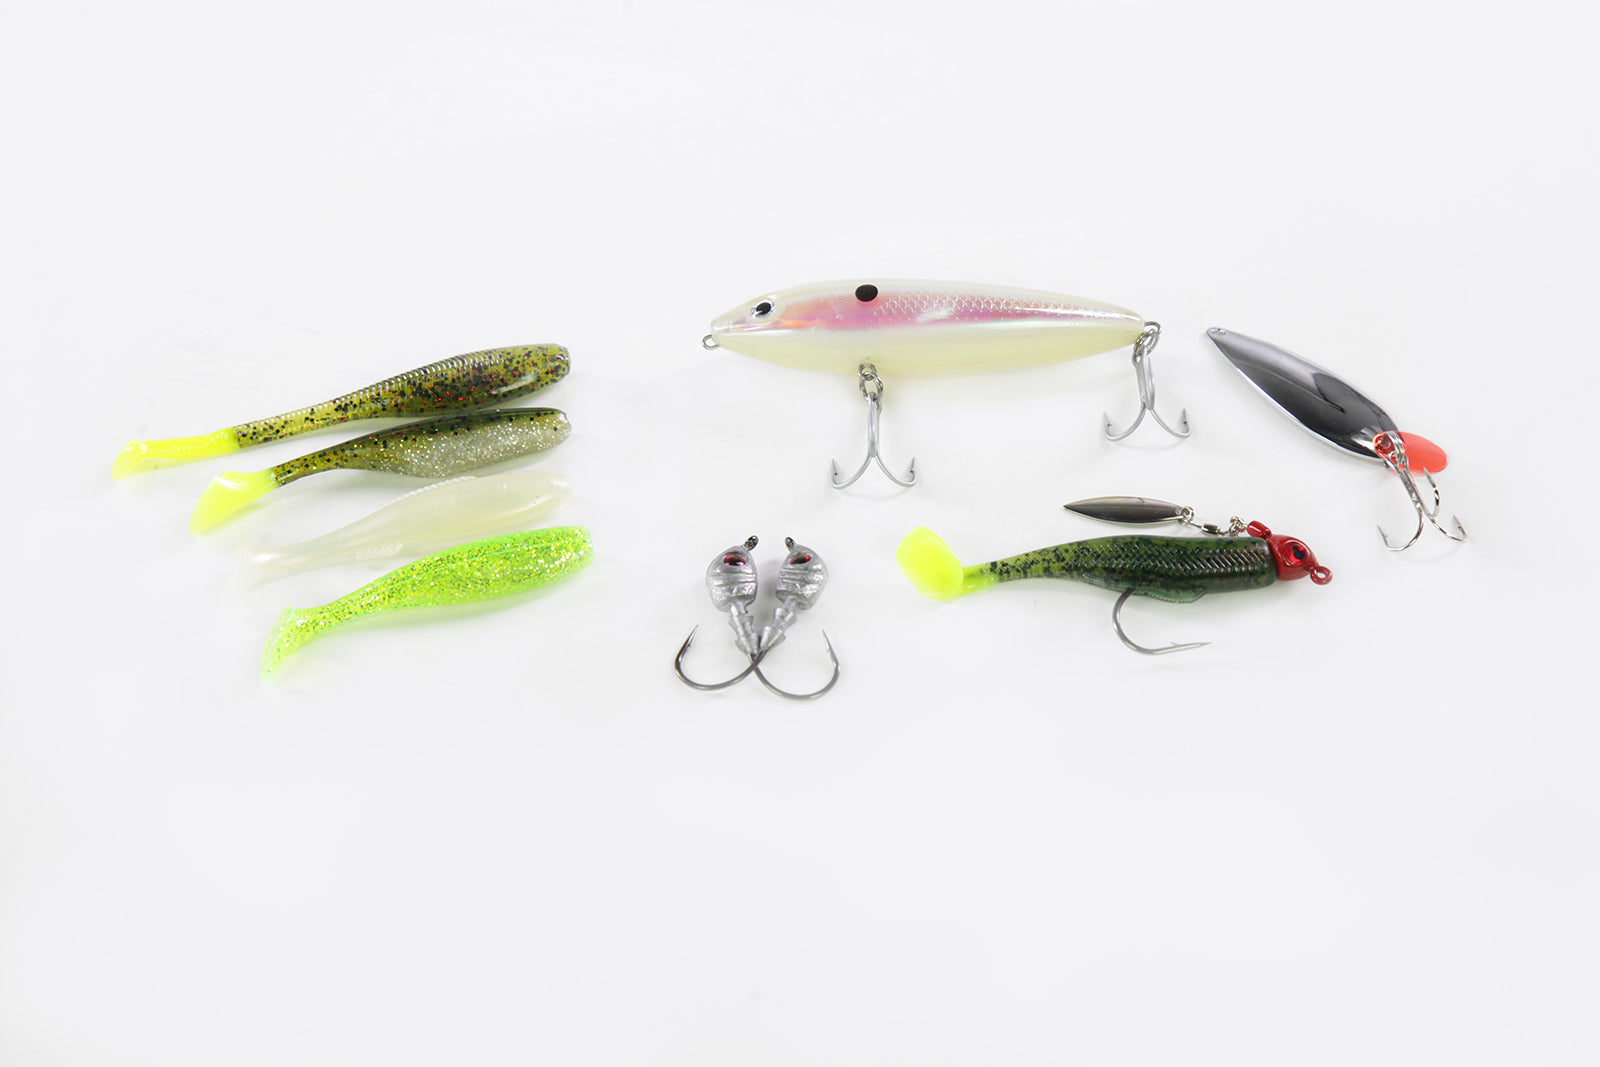 My Speckled Trout Tackle Box  Flats Class  